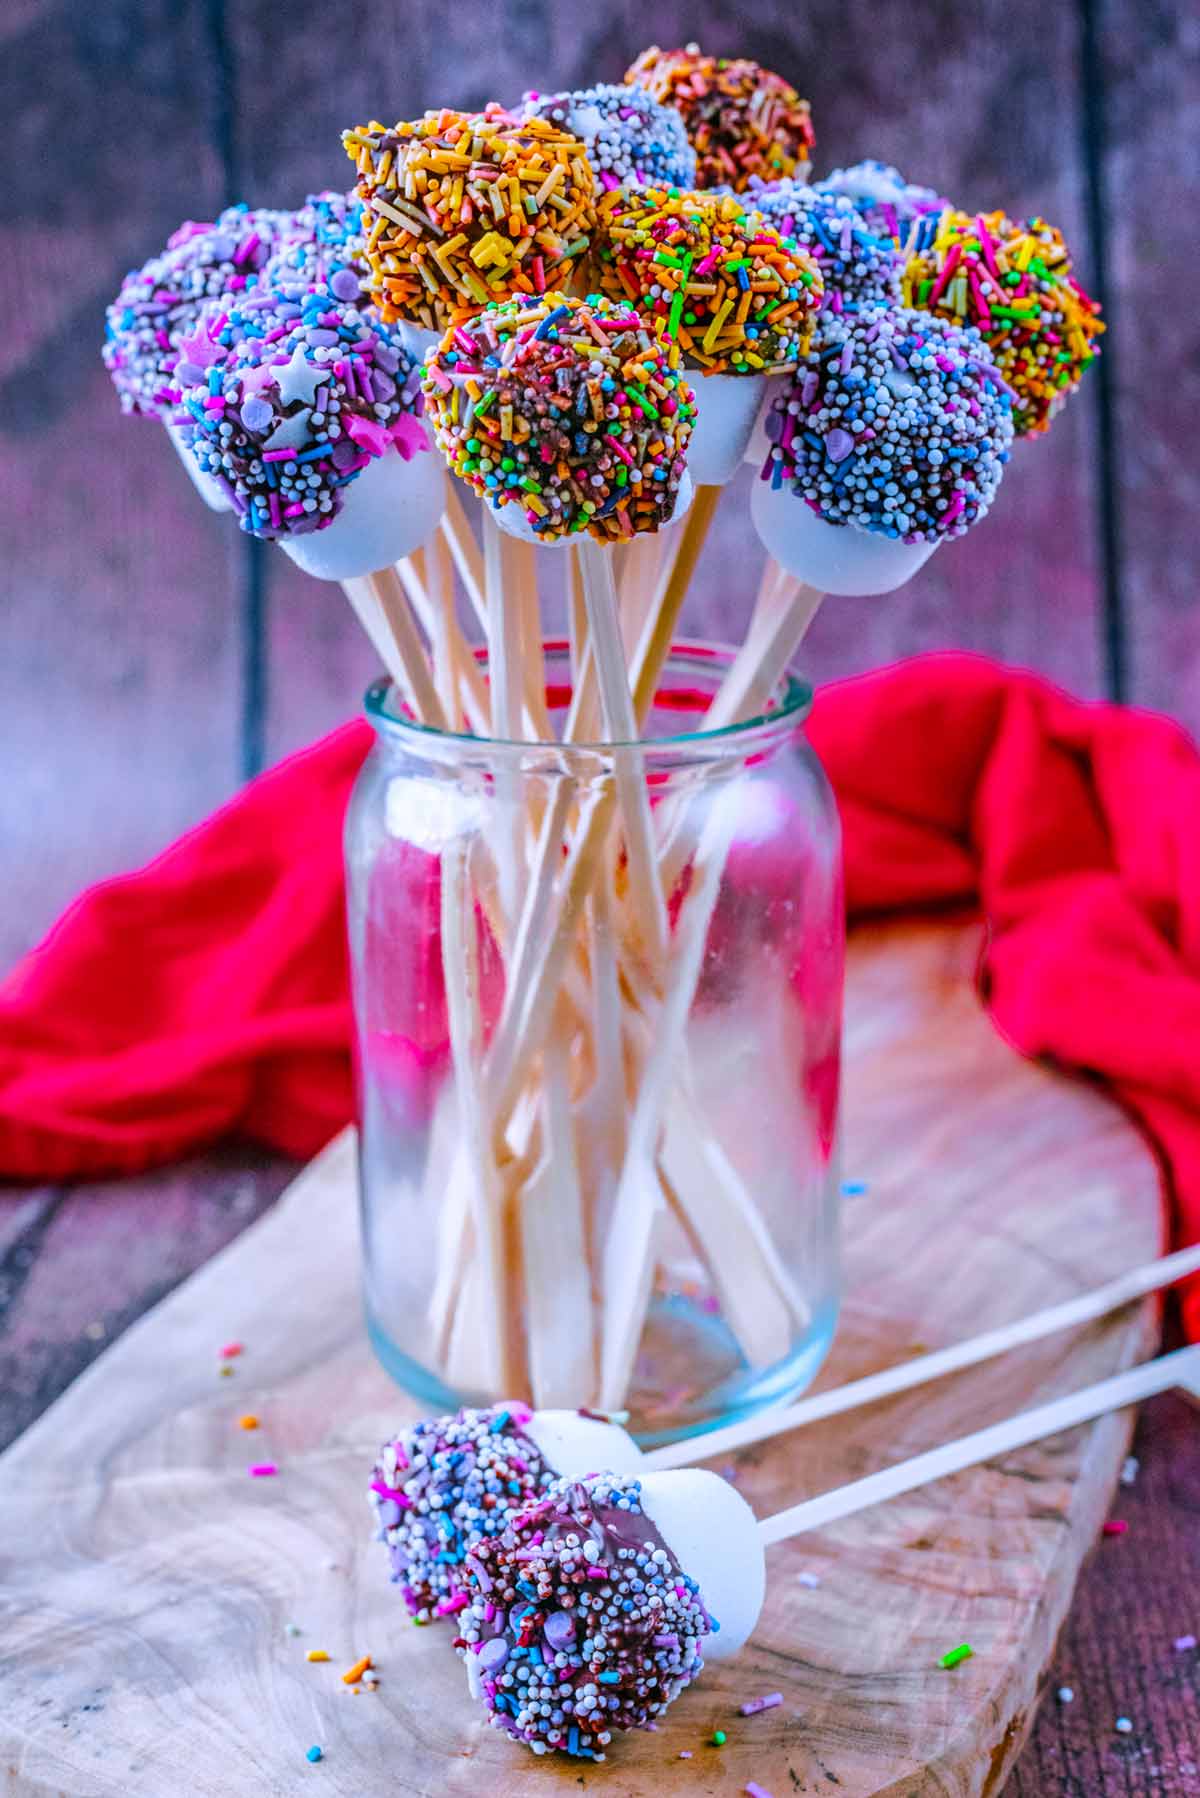 A glass jar with marshmallows on sticks in it, looking like a bunch of flowers.